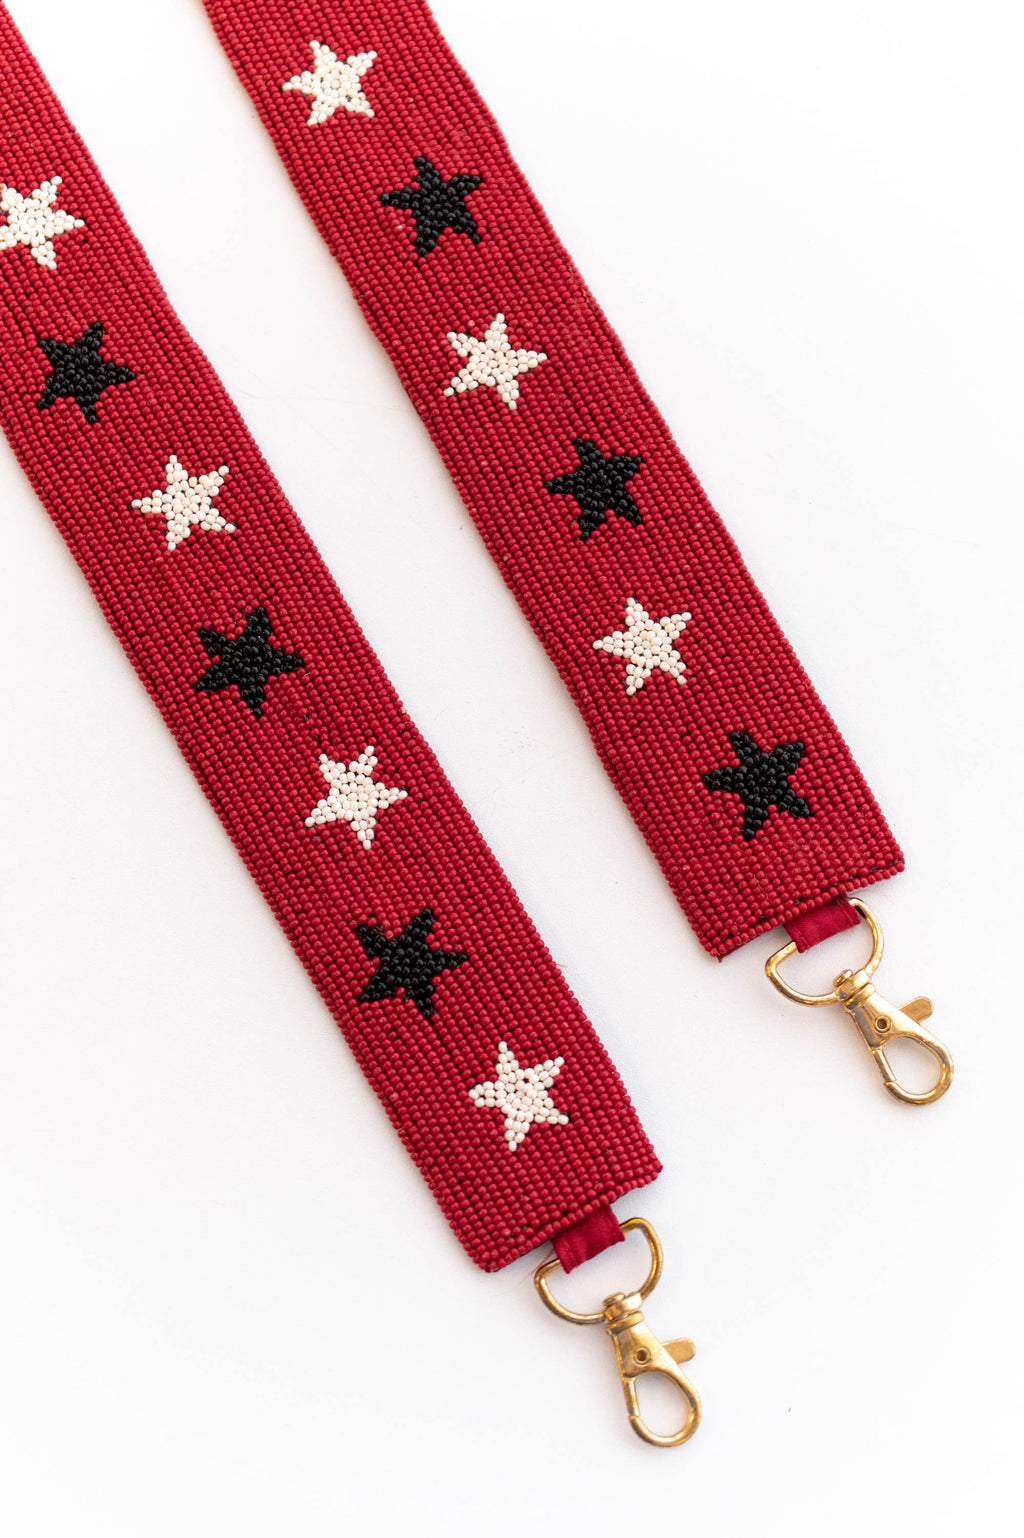 Navy/Red/Silver Purse Strap